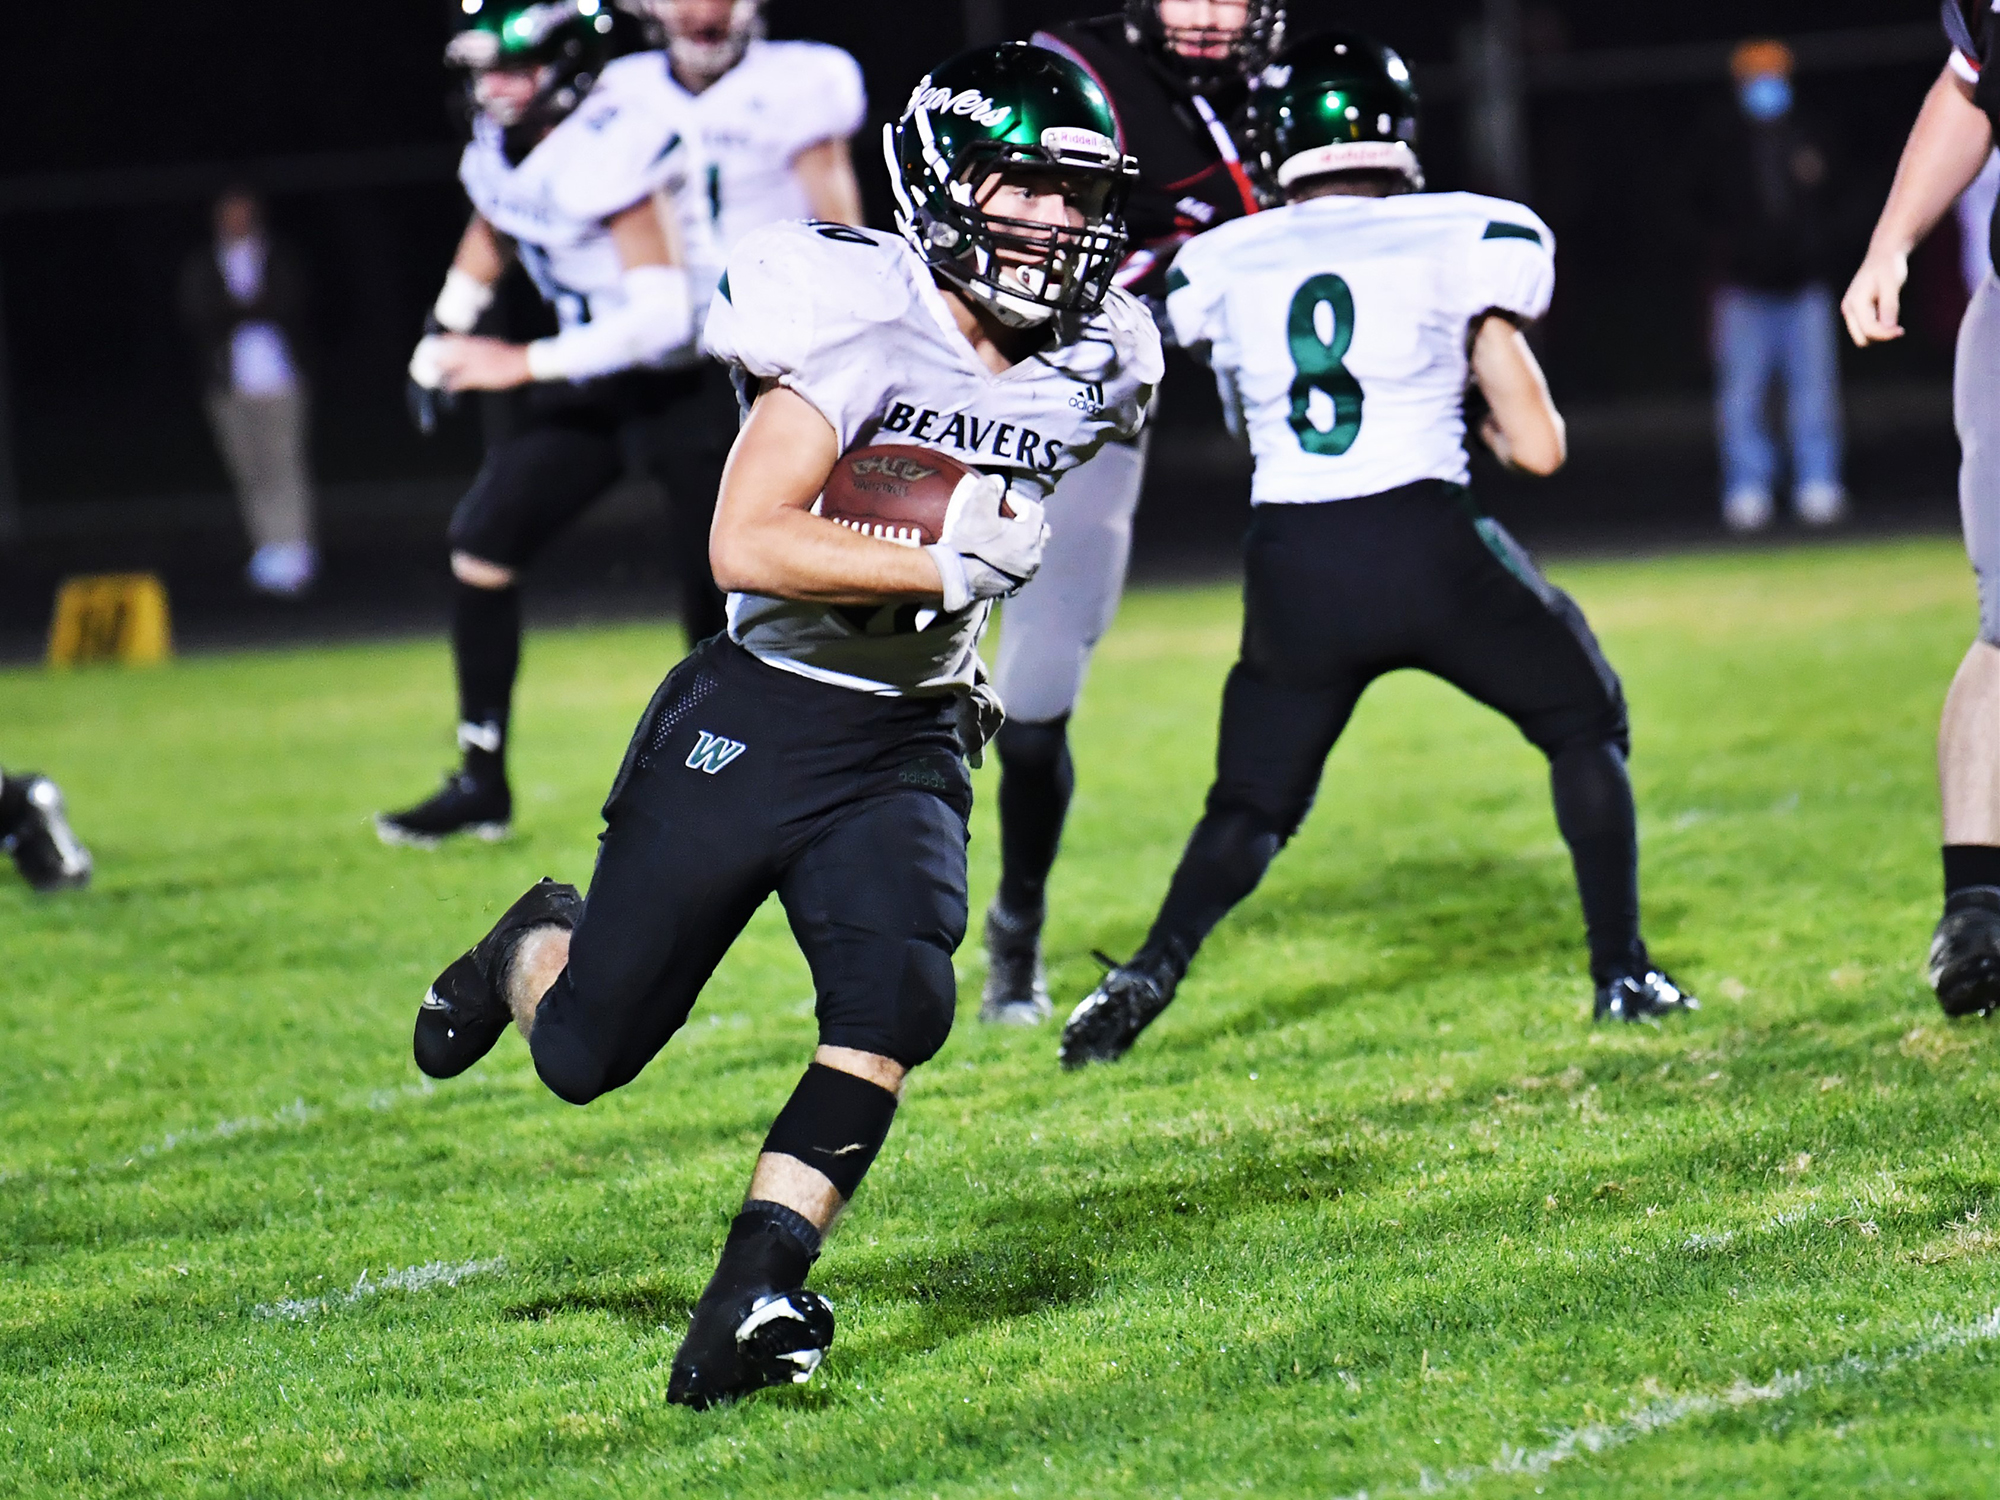 Dalton Beassie carries the ball in Woodland's 8-7 win over R.A. Long at Longview Memorial Stadium on Oct. 8. Beassie finished with 104 yards and a touchdown on 21 carries.